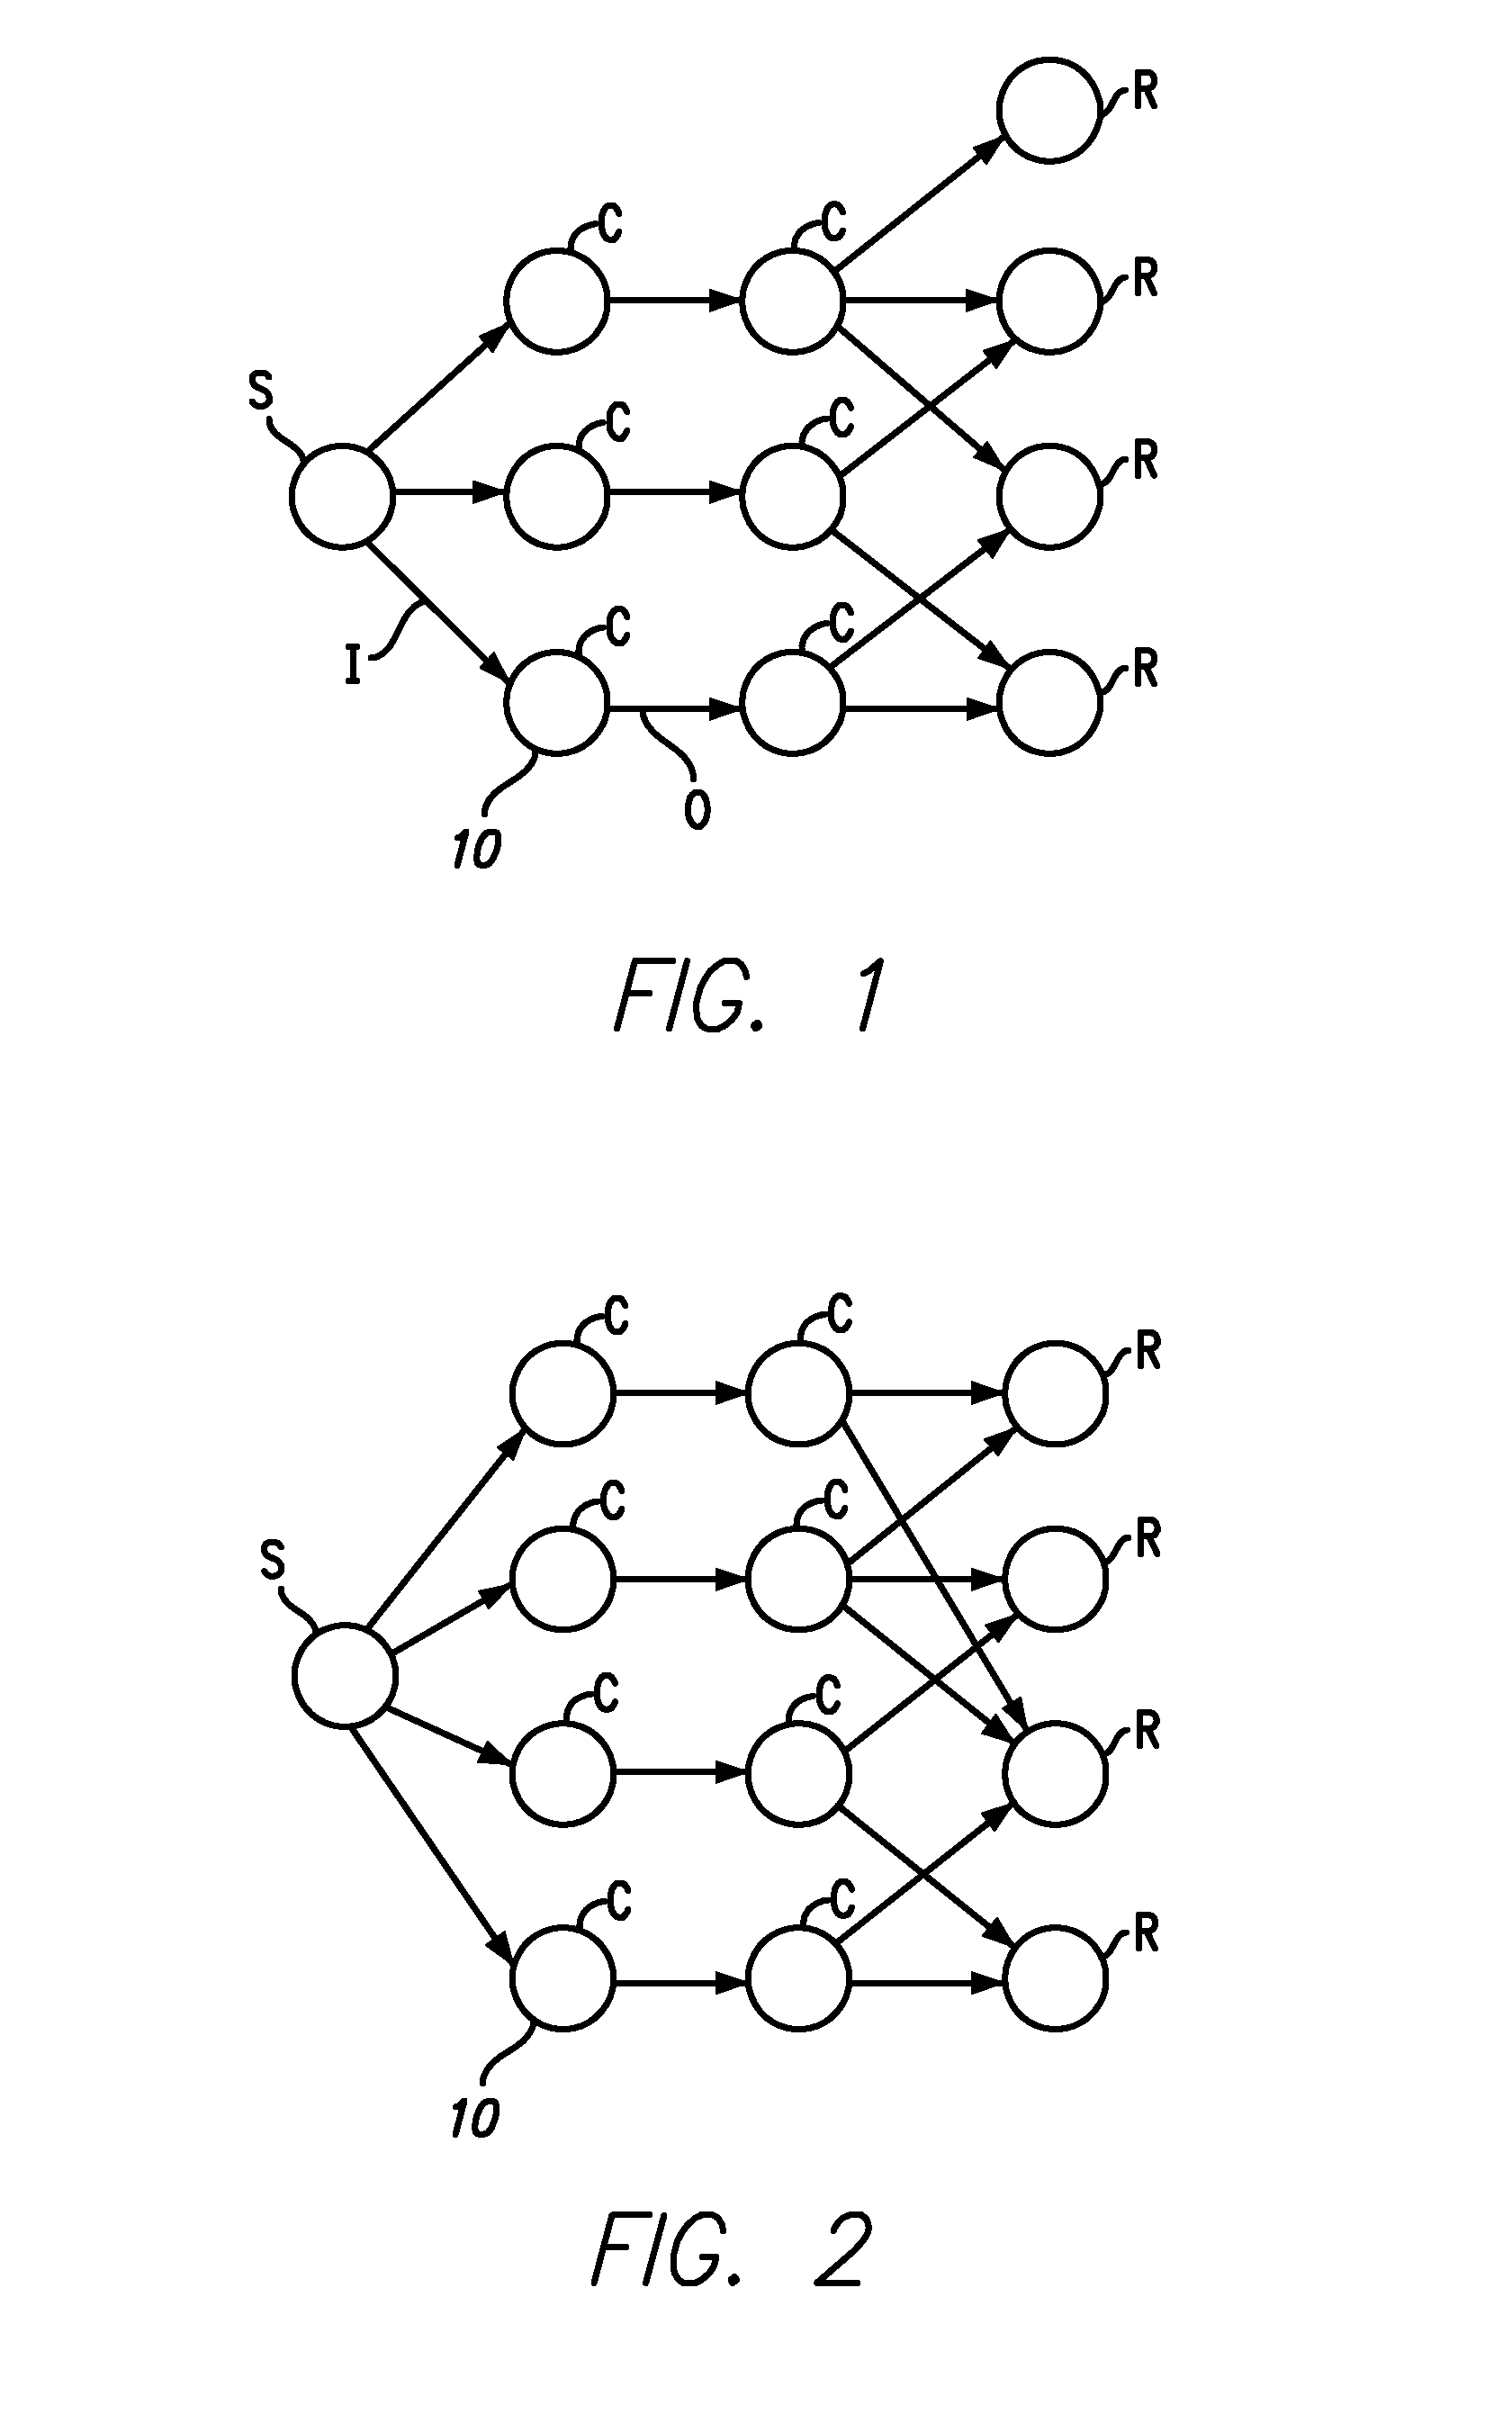 Deterministic distributed network coding